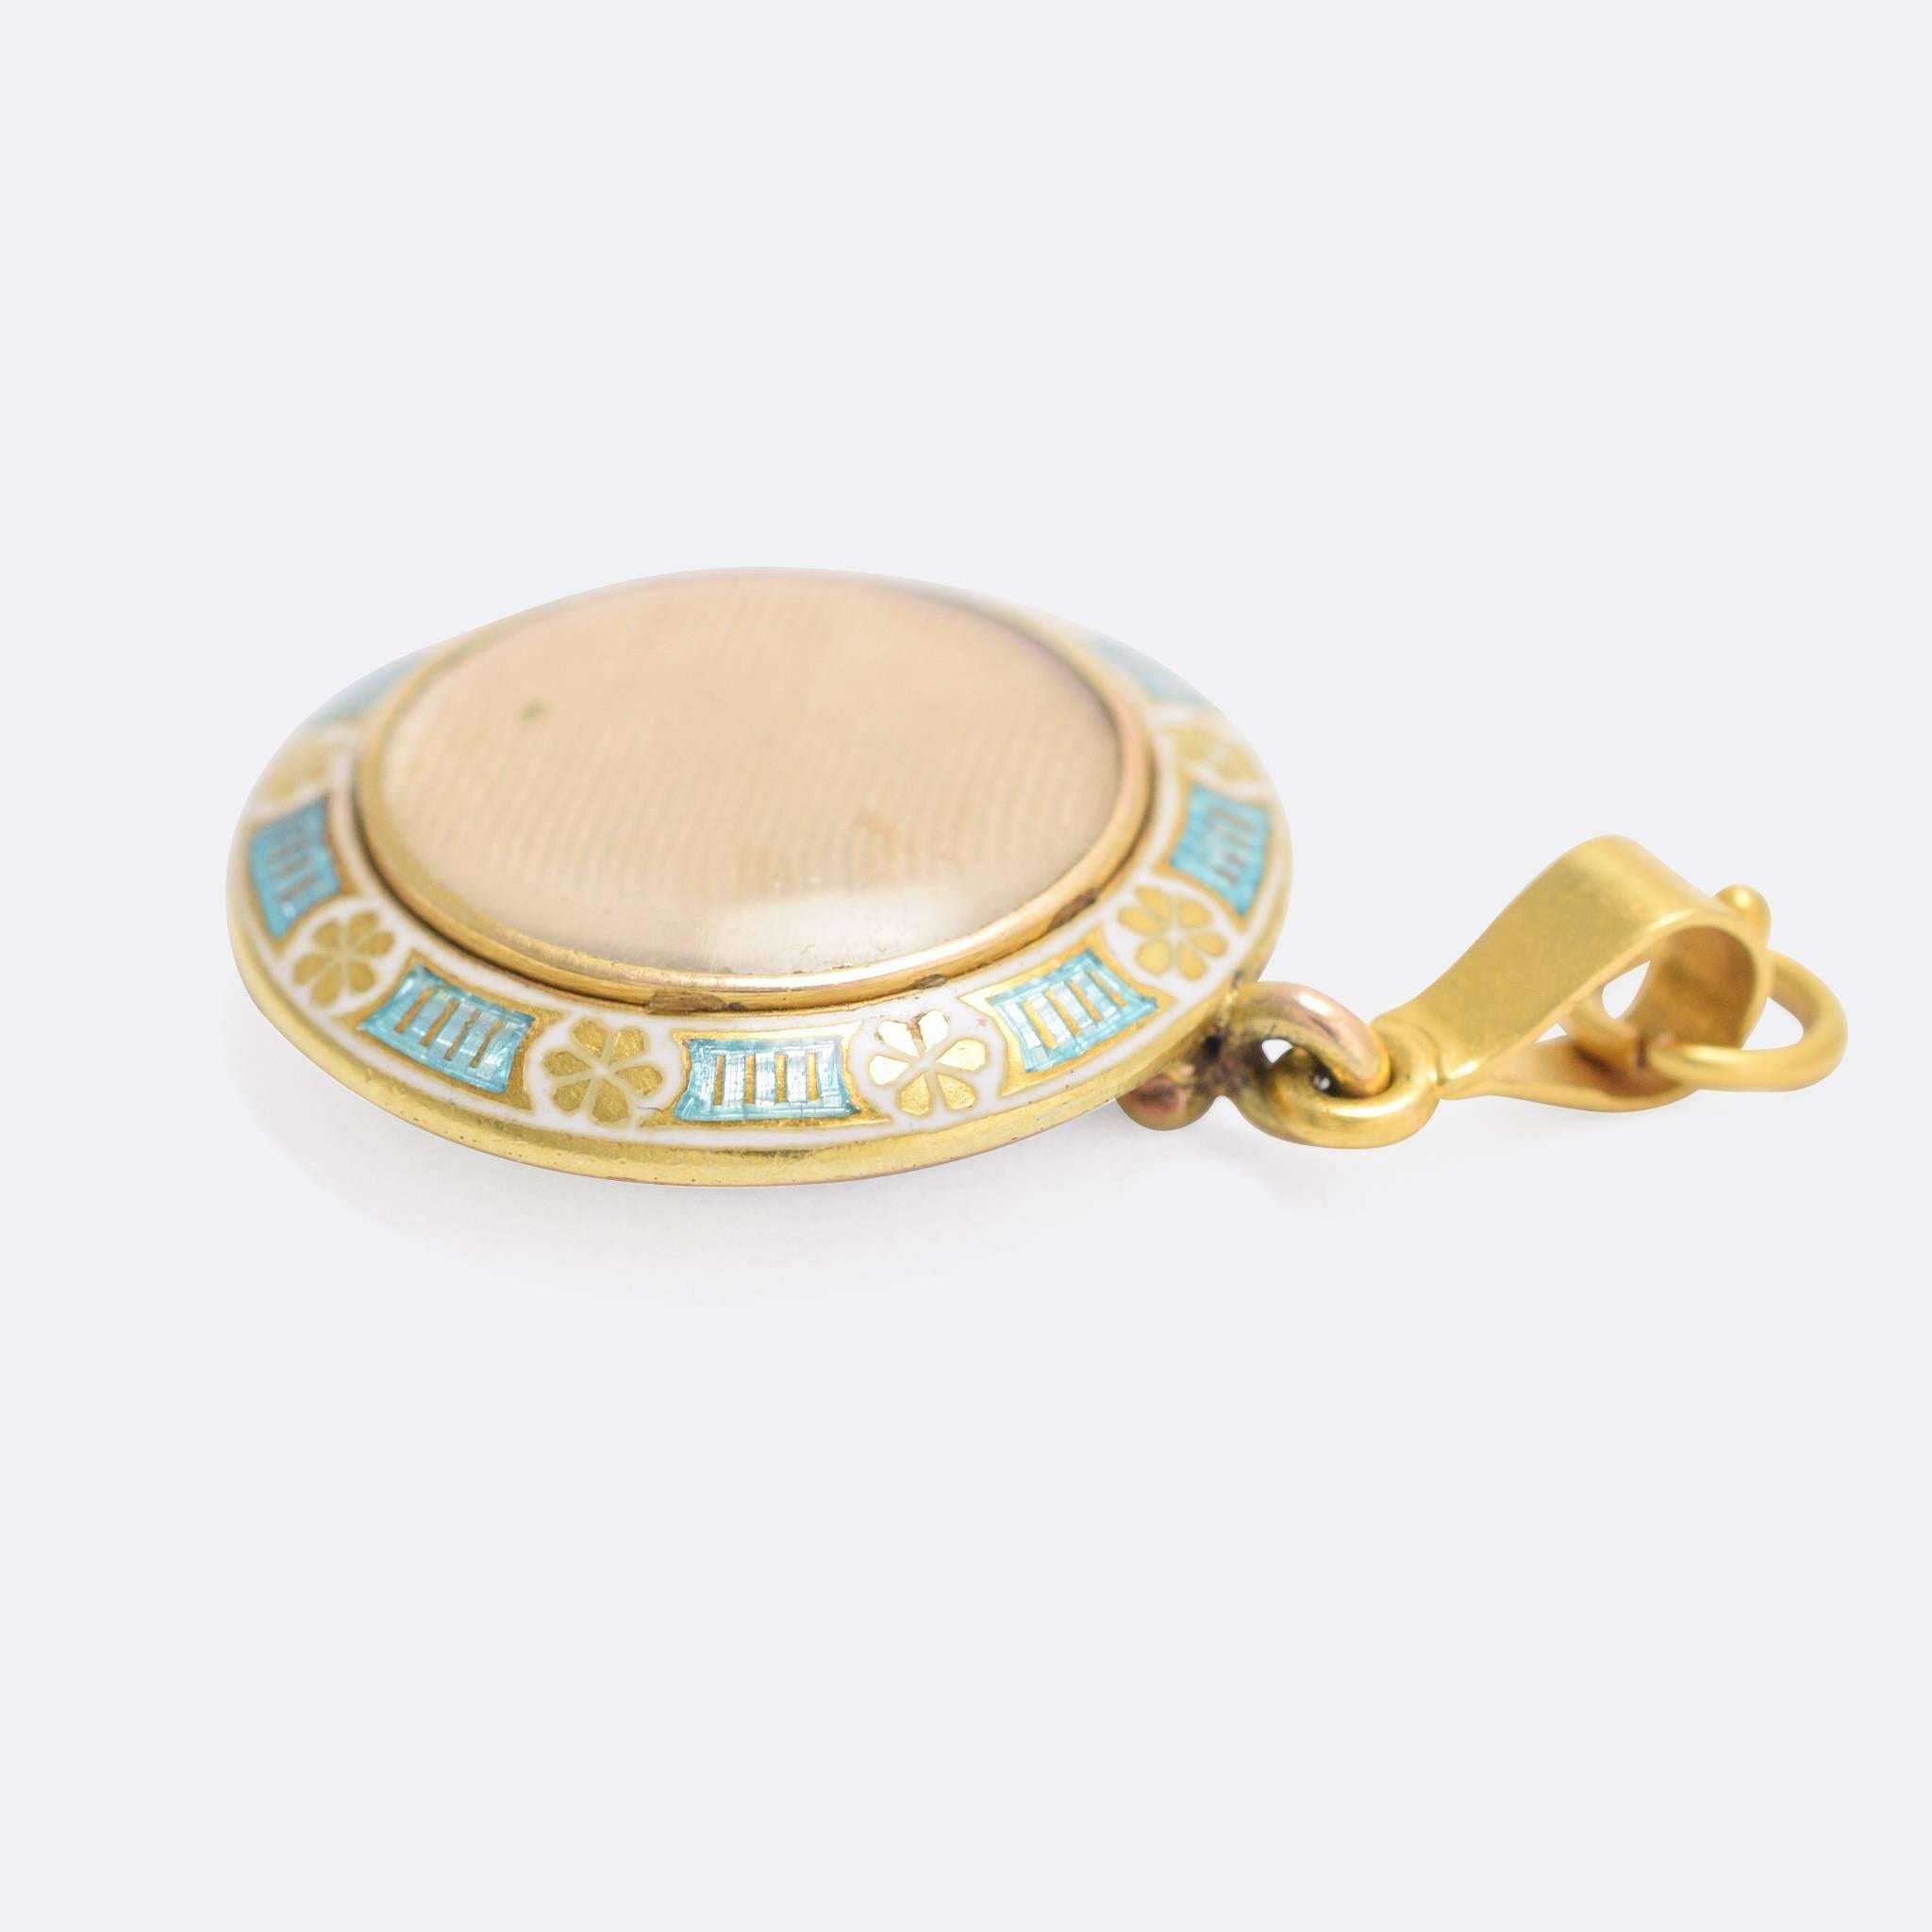 A beautiful antique round locket, by Child & Child of London. The front features exquisite enamelled border, in white and turquoise, around a central glass locket compartment. To the reverse, another glass compartment with an inscription dating to